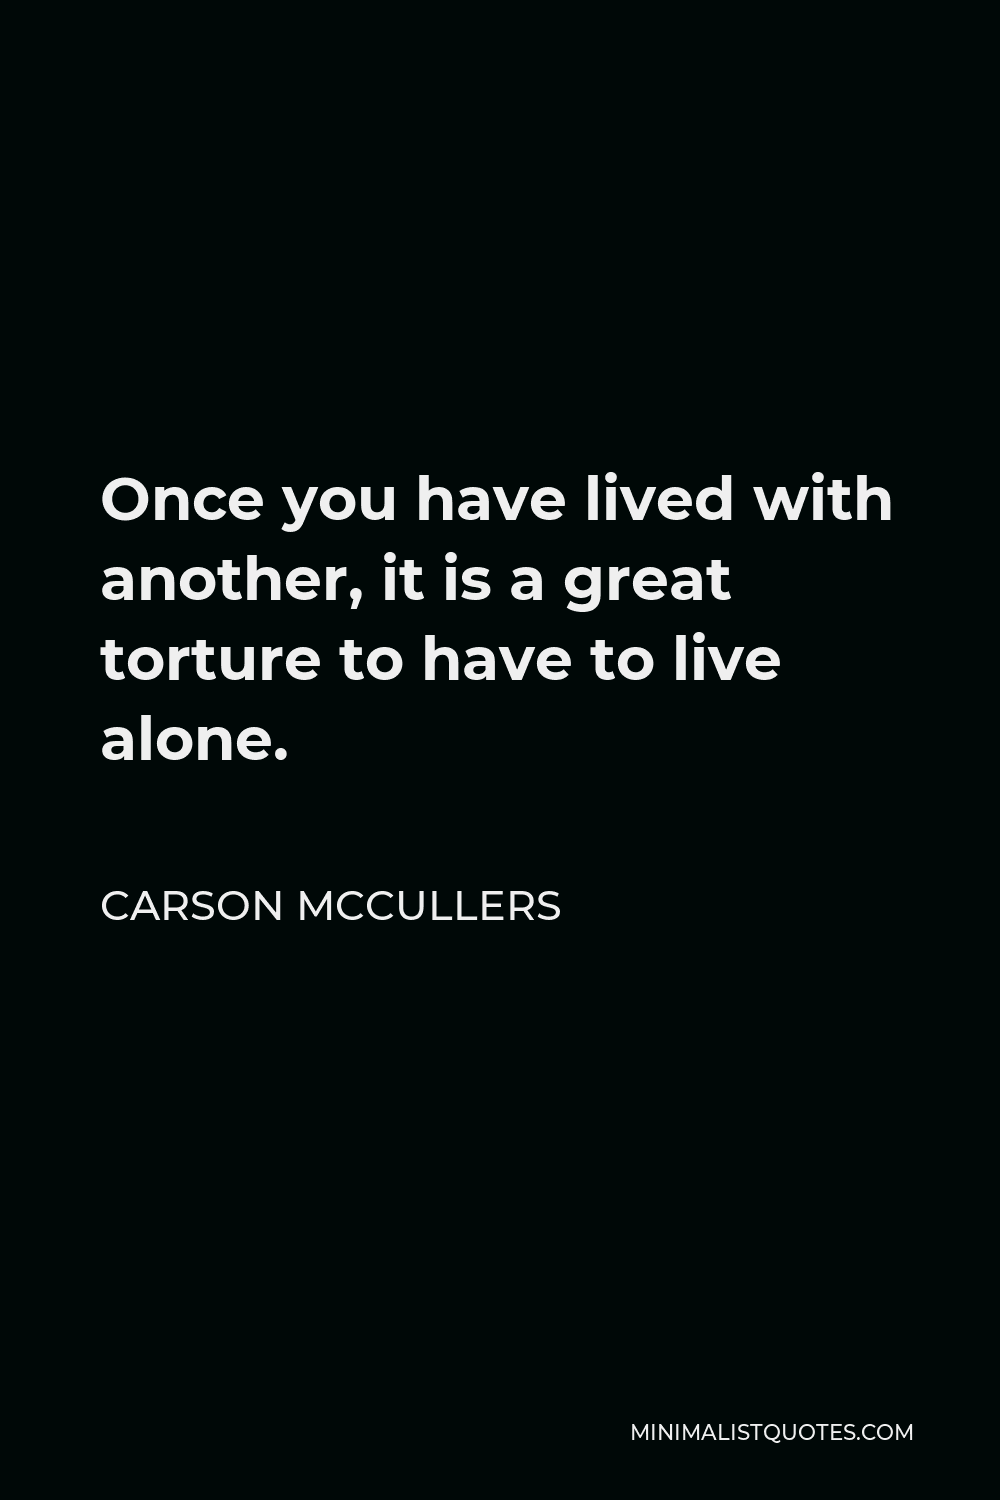 Carson McCullers Quote - Once you have lived with another, it is a great torture to have to live alone.